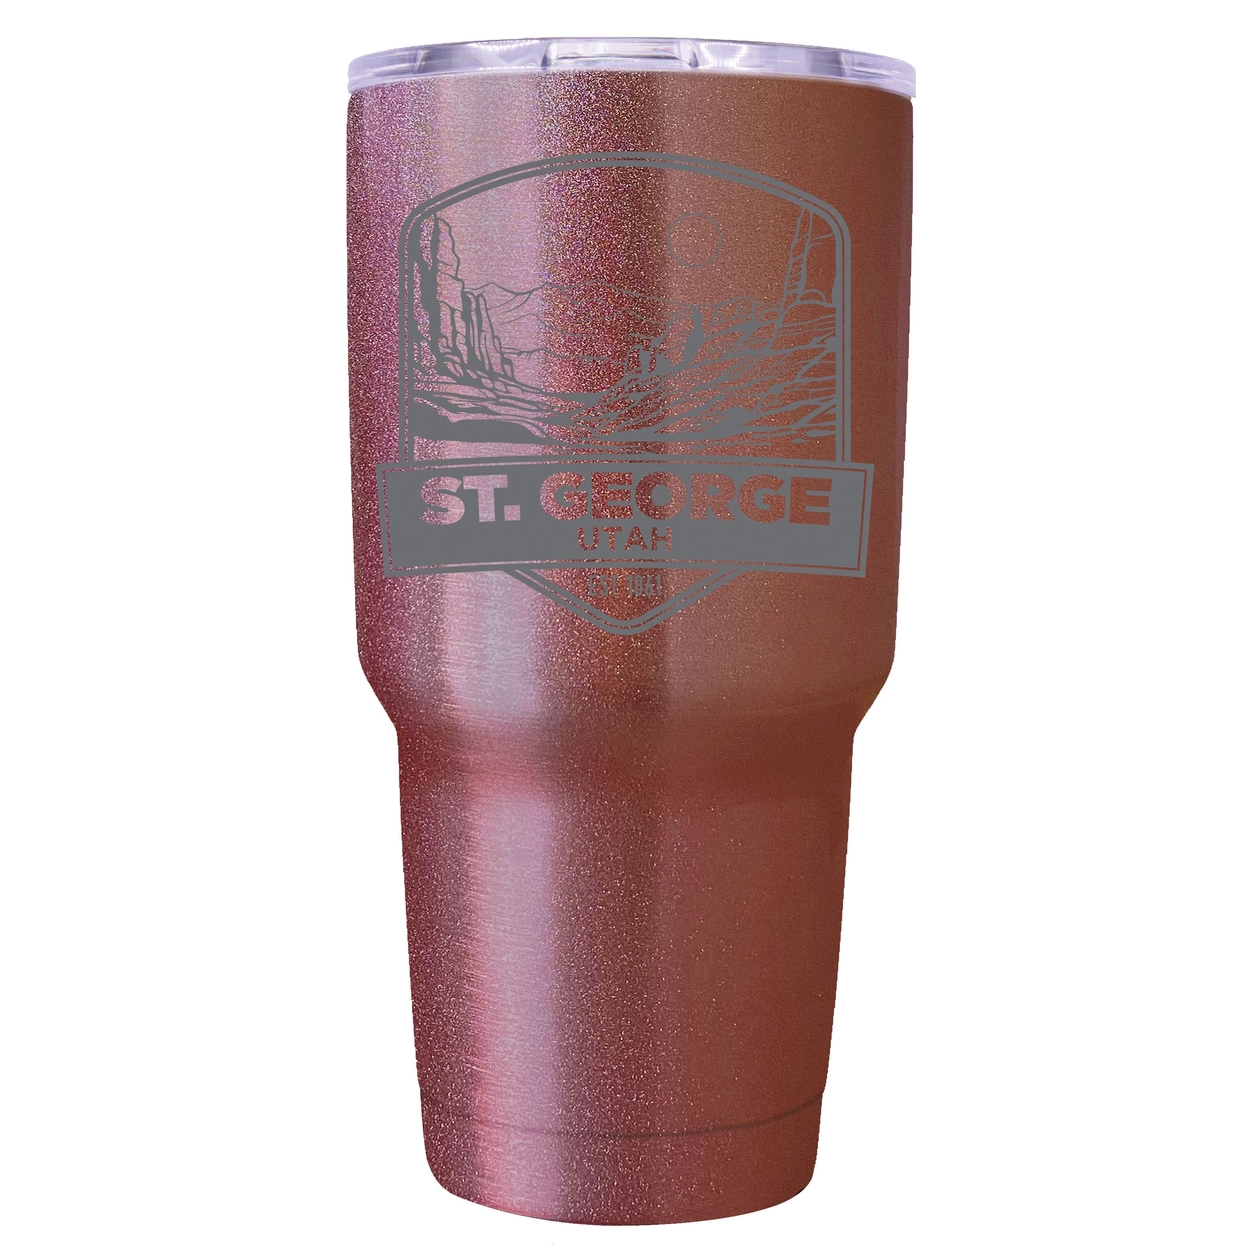 St. George Utah Souvenir 24 Oz Engraved Insulated Stainless Steel Tumbler - Navy,,Single Unit